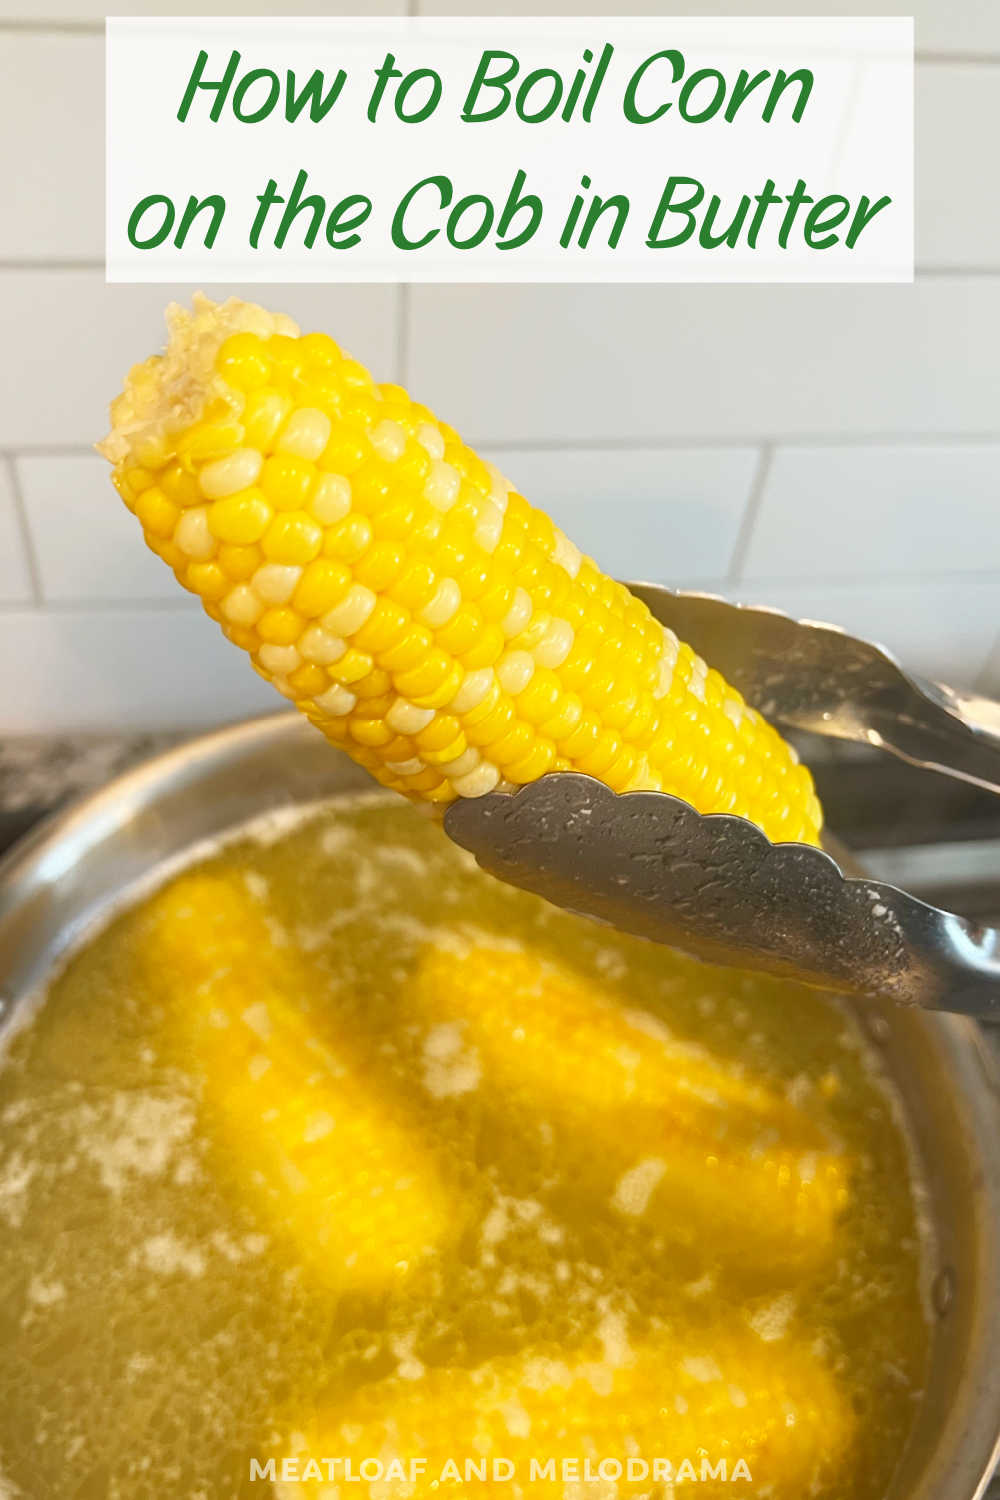 Learn How to Boil Corn on the Cob in Butter with this easy corn recipe. One of the best ways to cook fresh sweet corn for an easy side dish the whole family will love! via @meamel